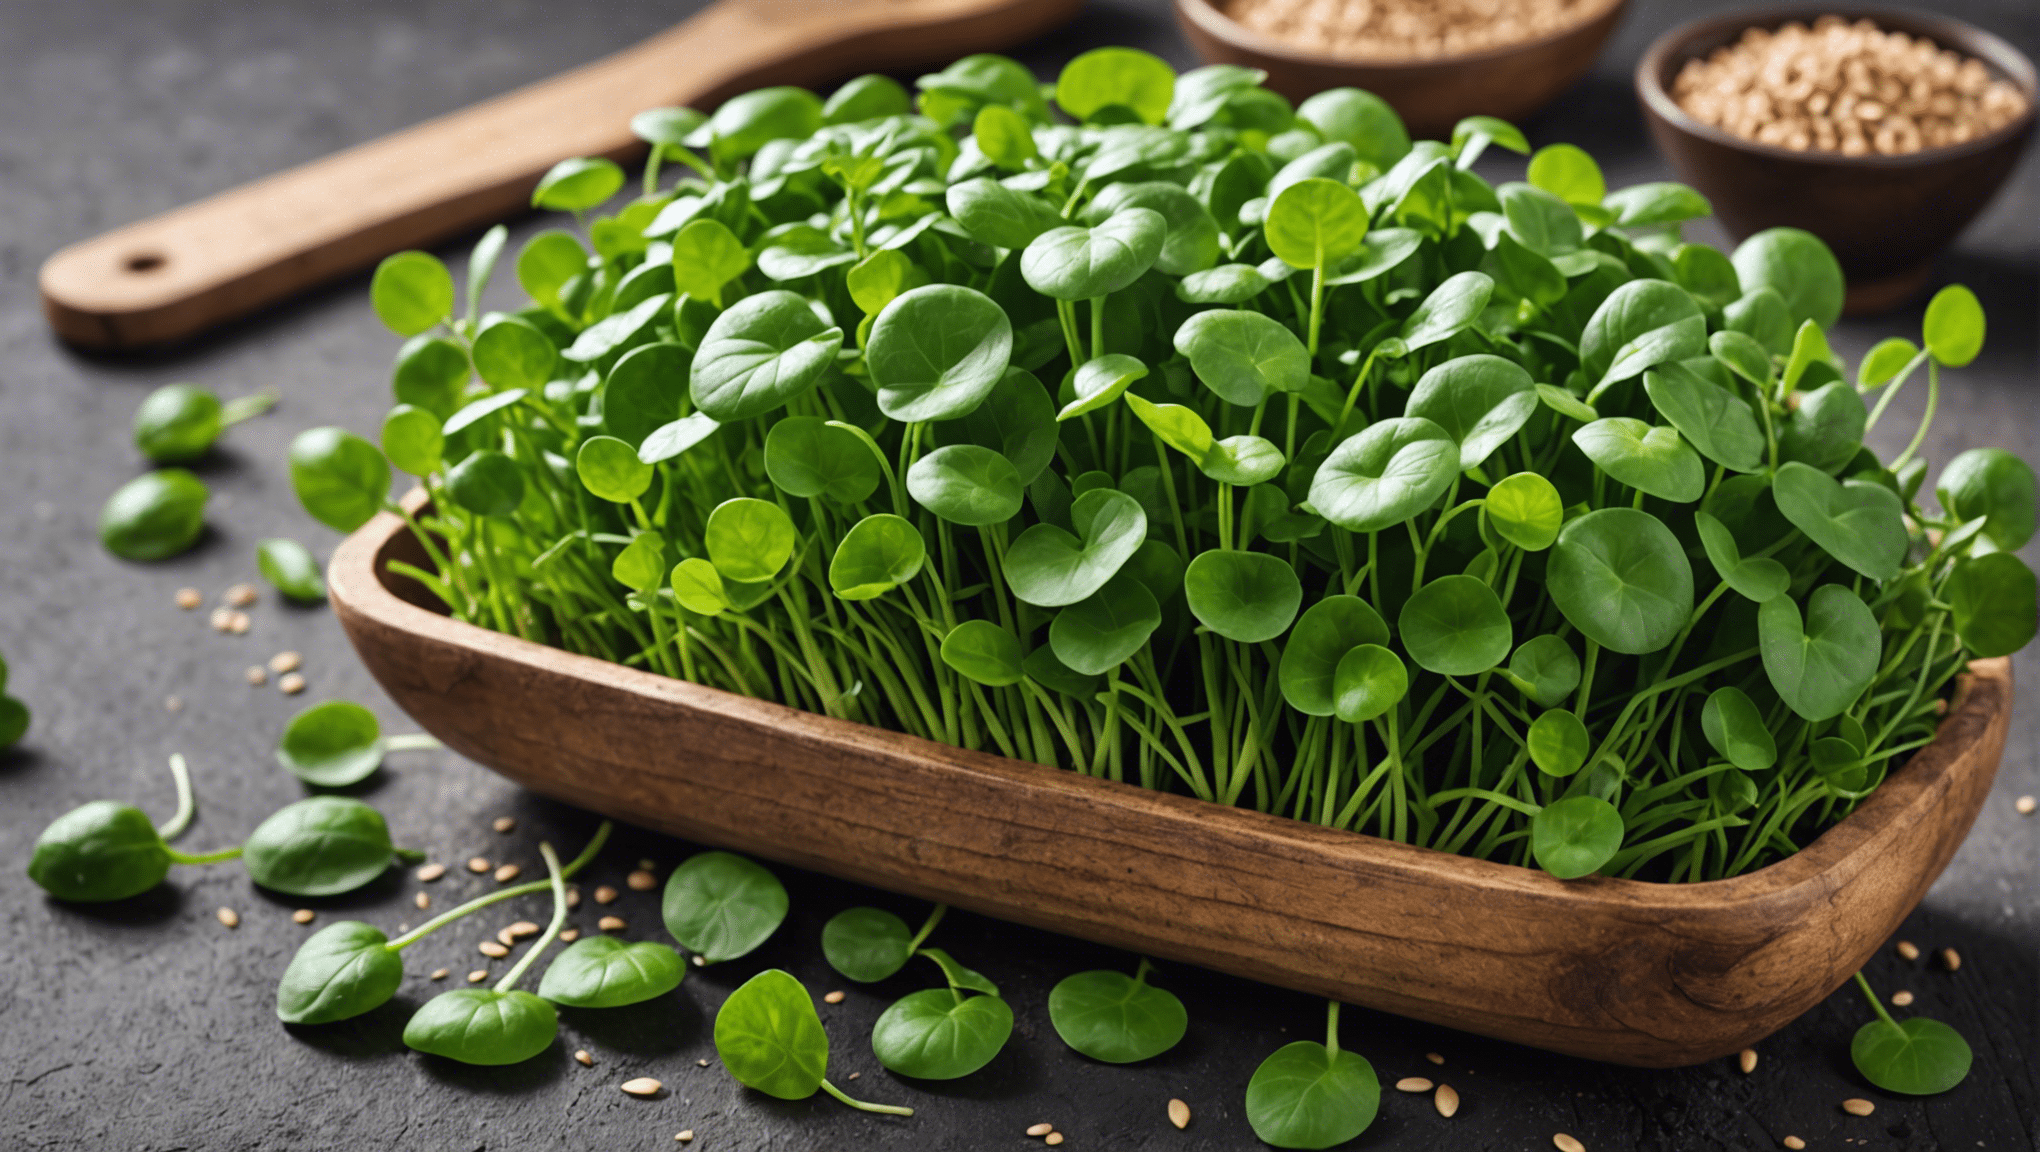 discover the potential of watercress seeds as the next superfood in the market. learn about the health benefits and uses of watercress seeds.